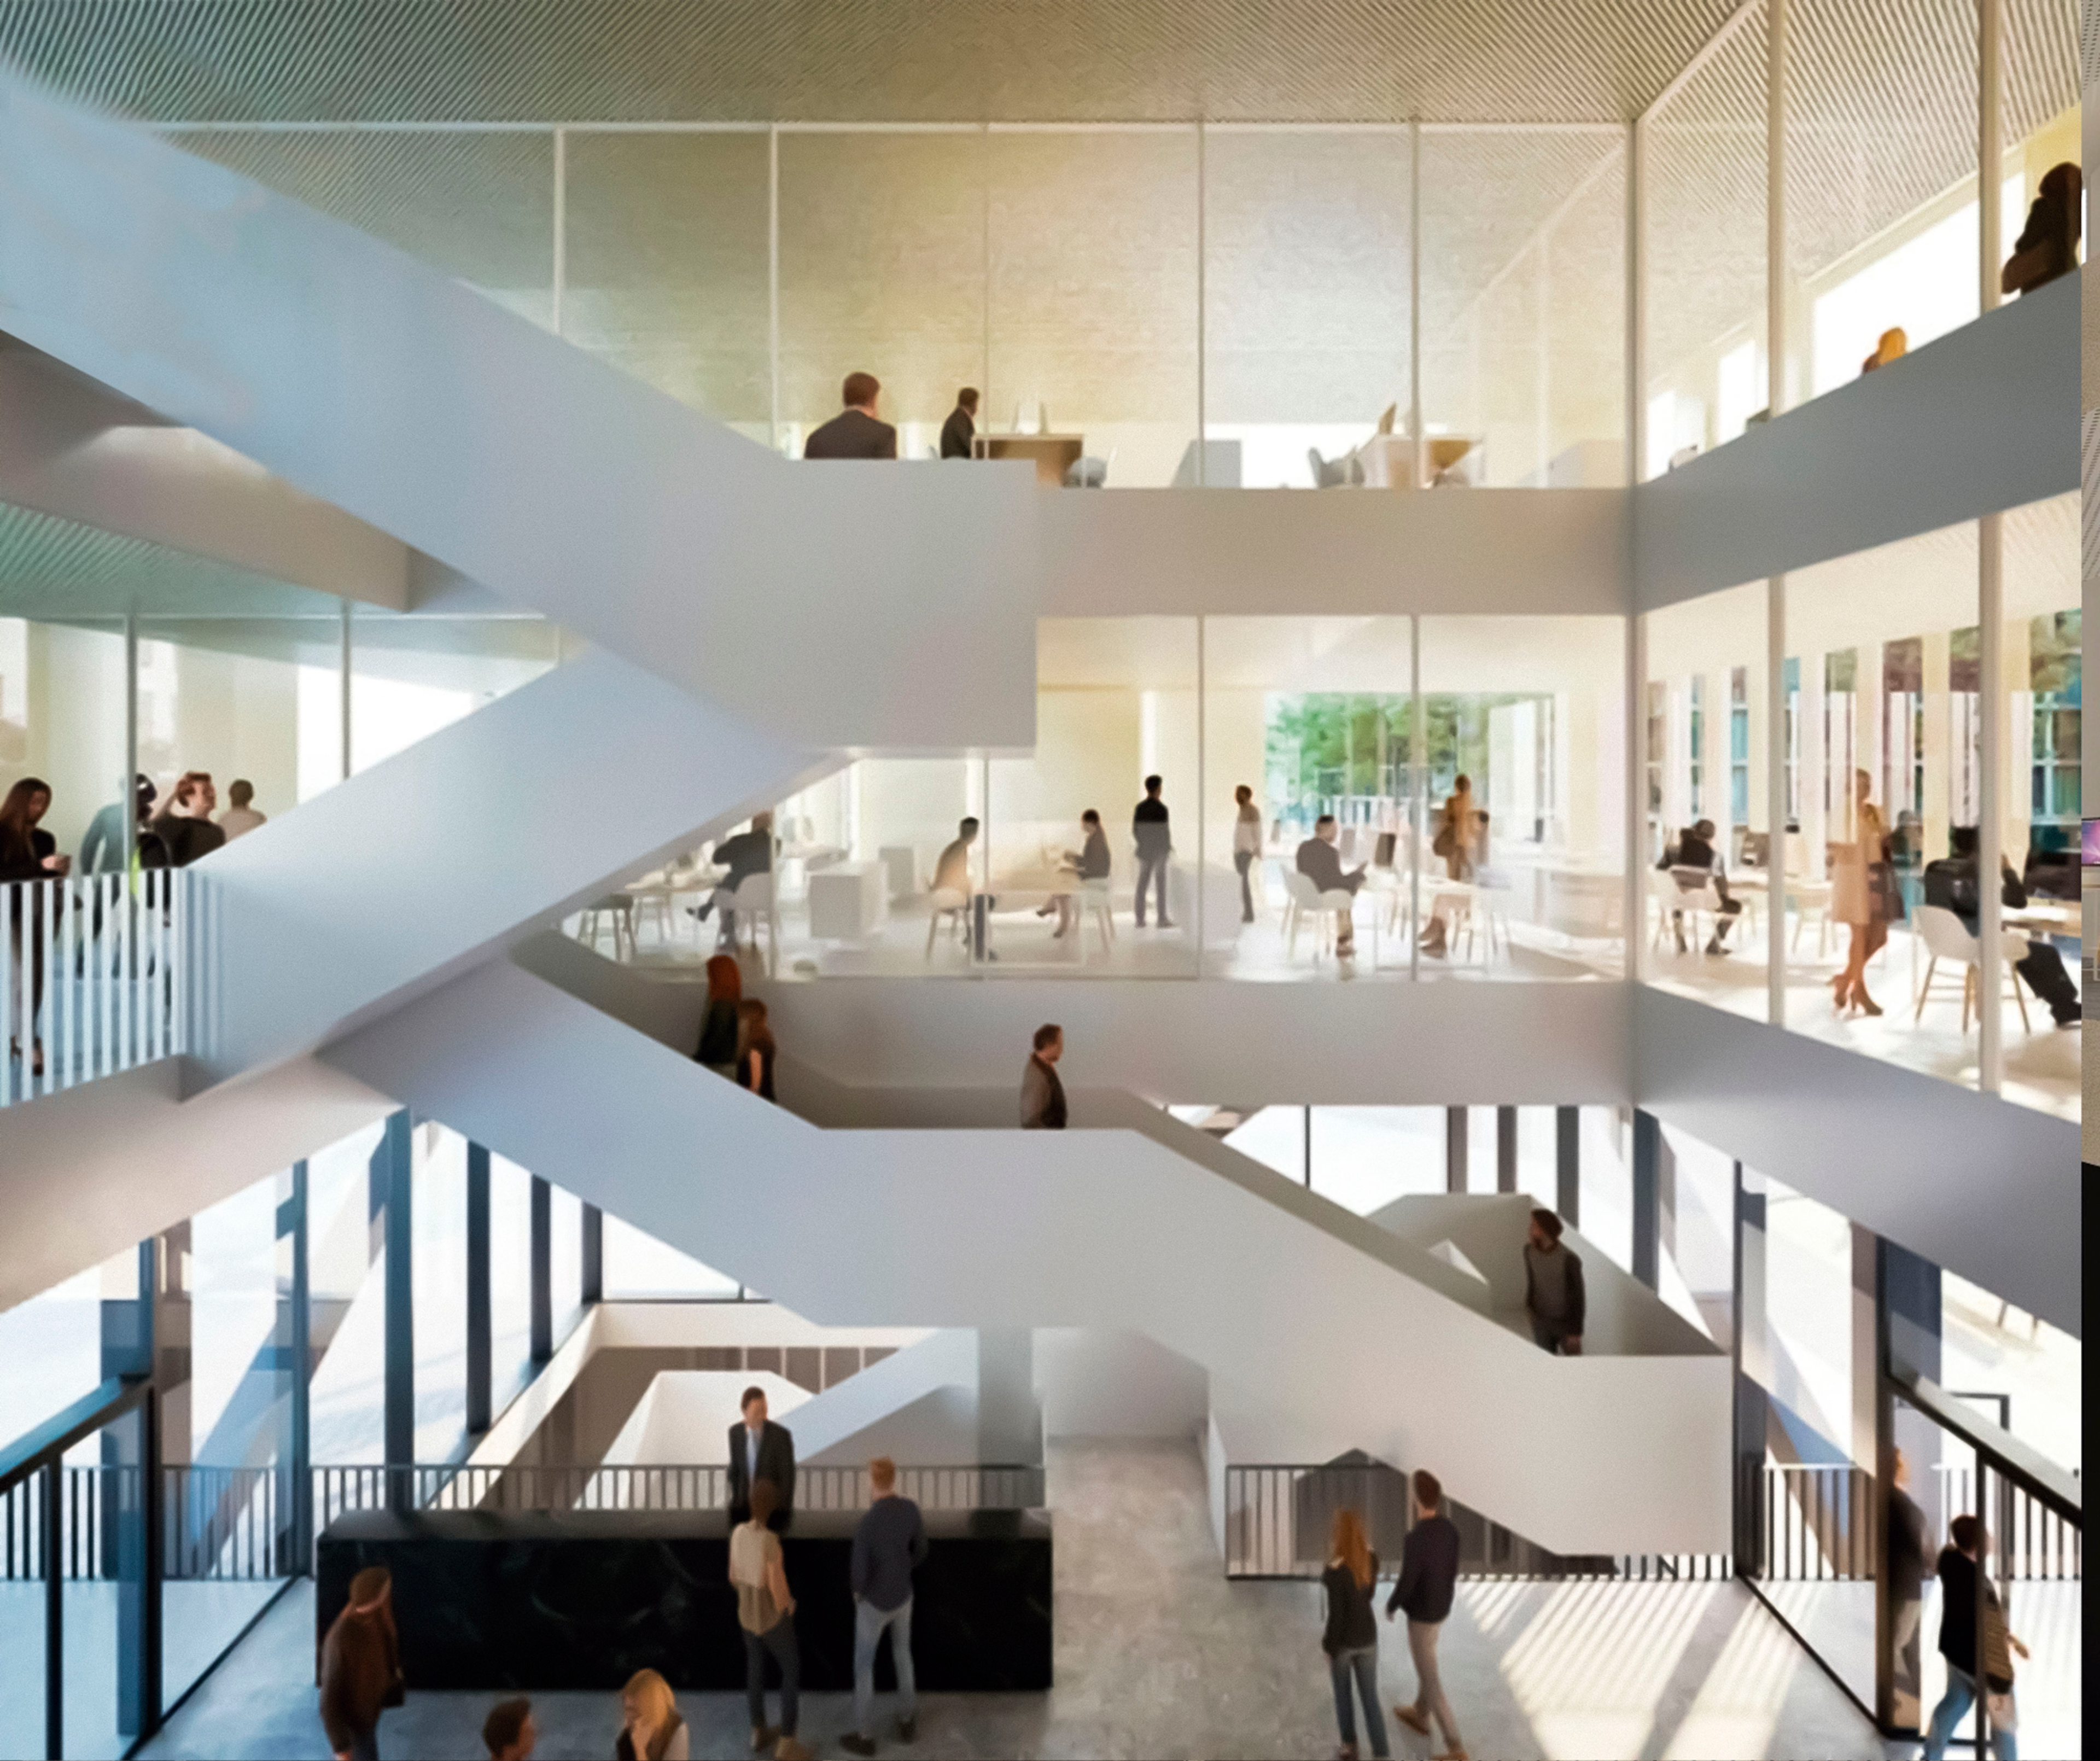 People mingle in a spacious atrium with intersecting staircases and a minimalist design.